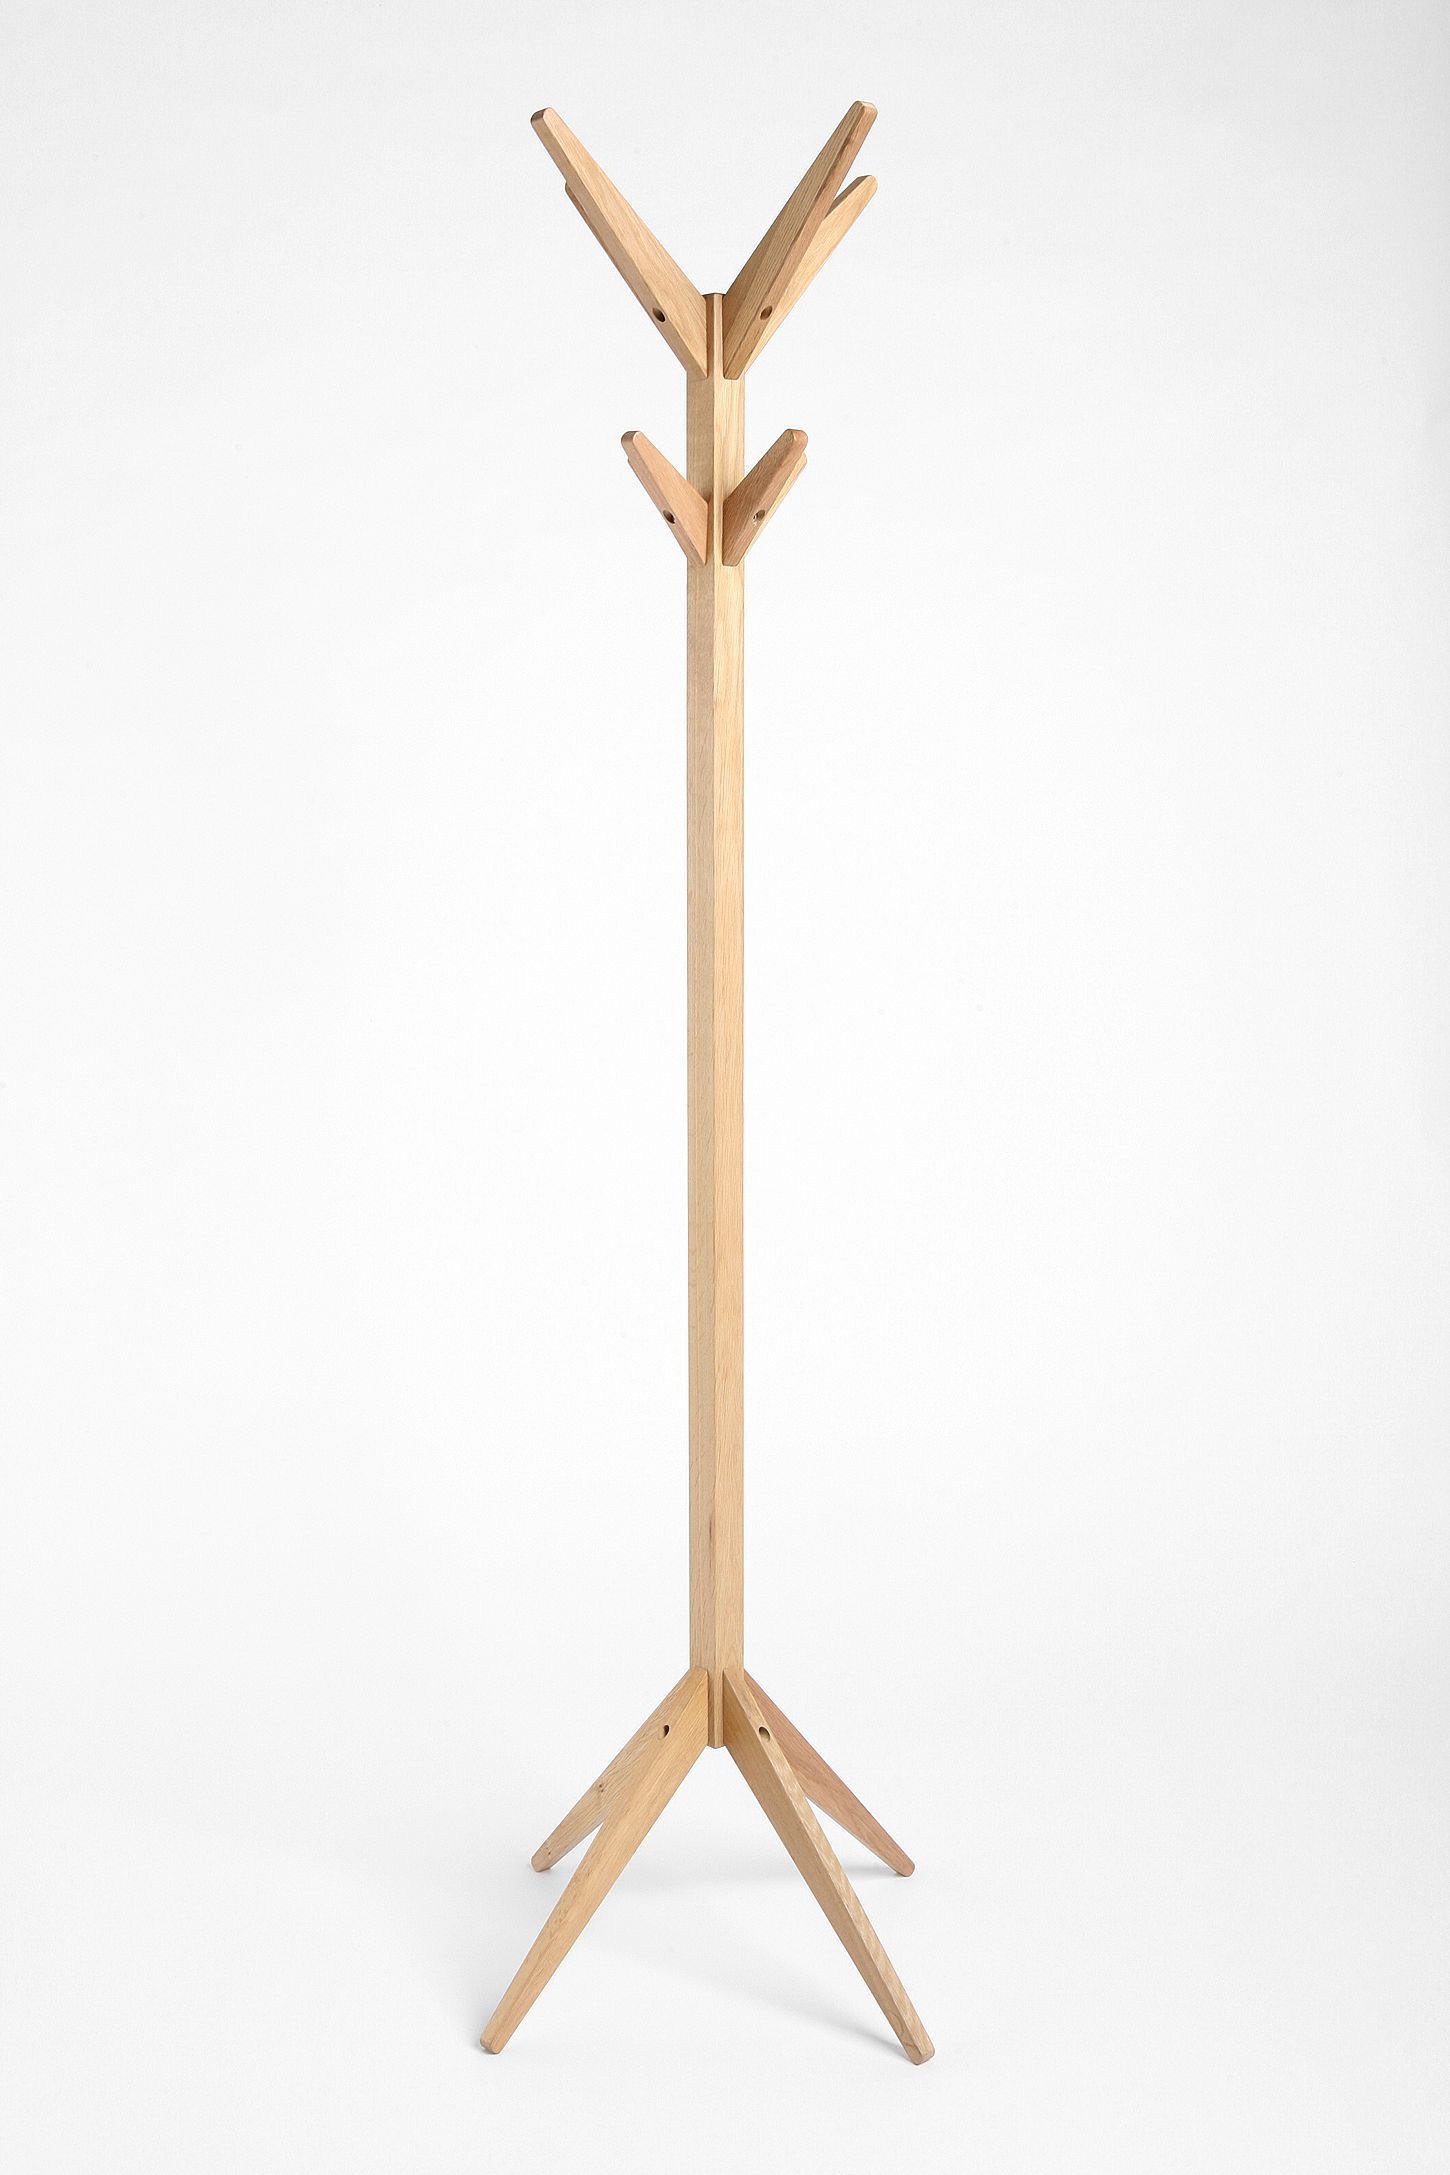 Sleek and modern this solid oak coat rack features clean